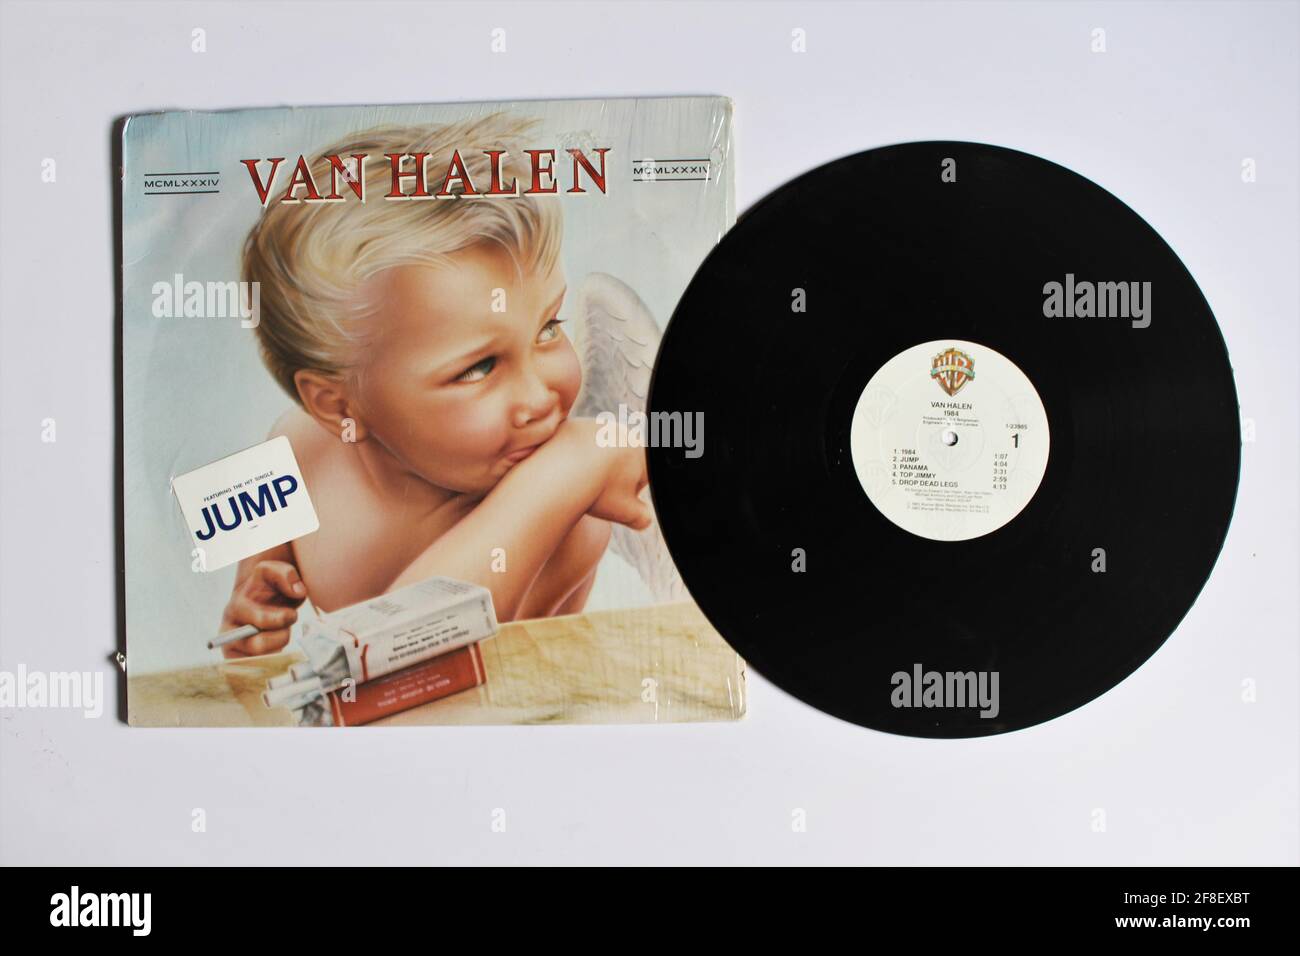 Hard rock, heavy metal and glam metal band, Van Halen music album on vinyl  record LP disc. Titled: 1984 also known as MCMLXXXIV Stock Photo - Alamy